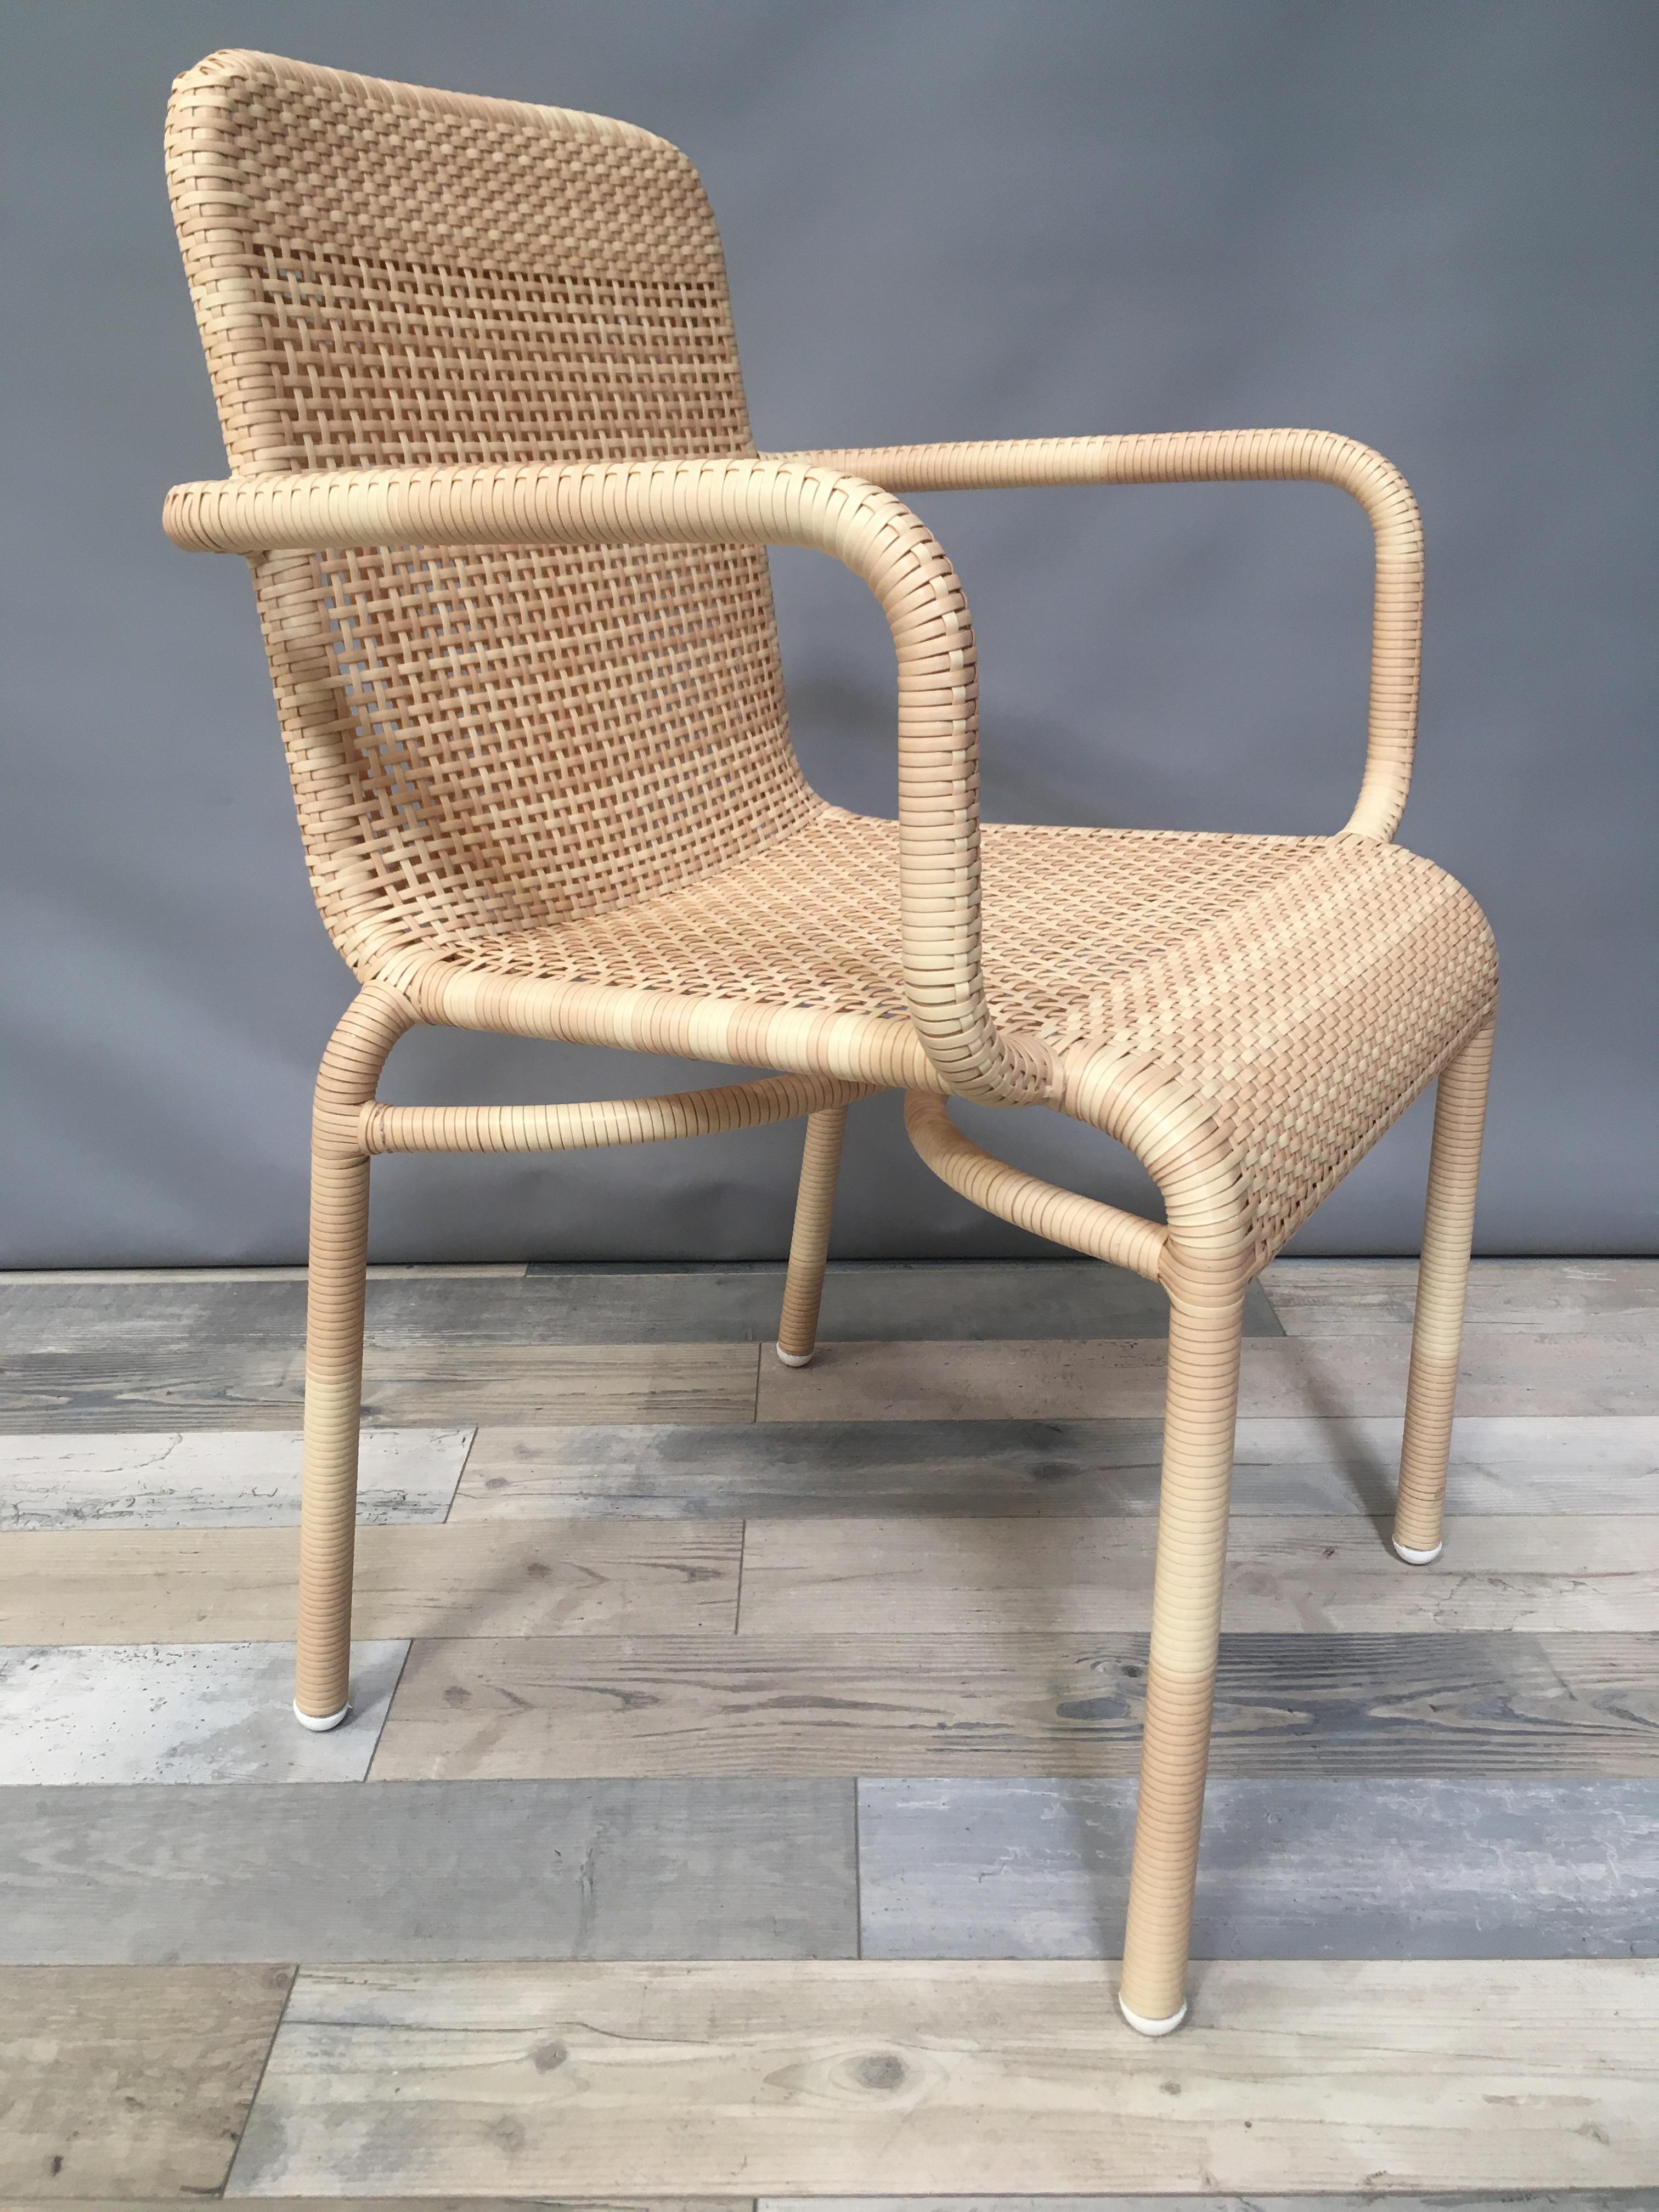 French Design and Braided Resin Rattan Effect Outdoor Chair For Sale 4